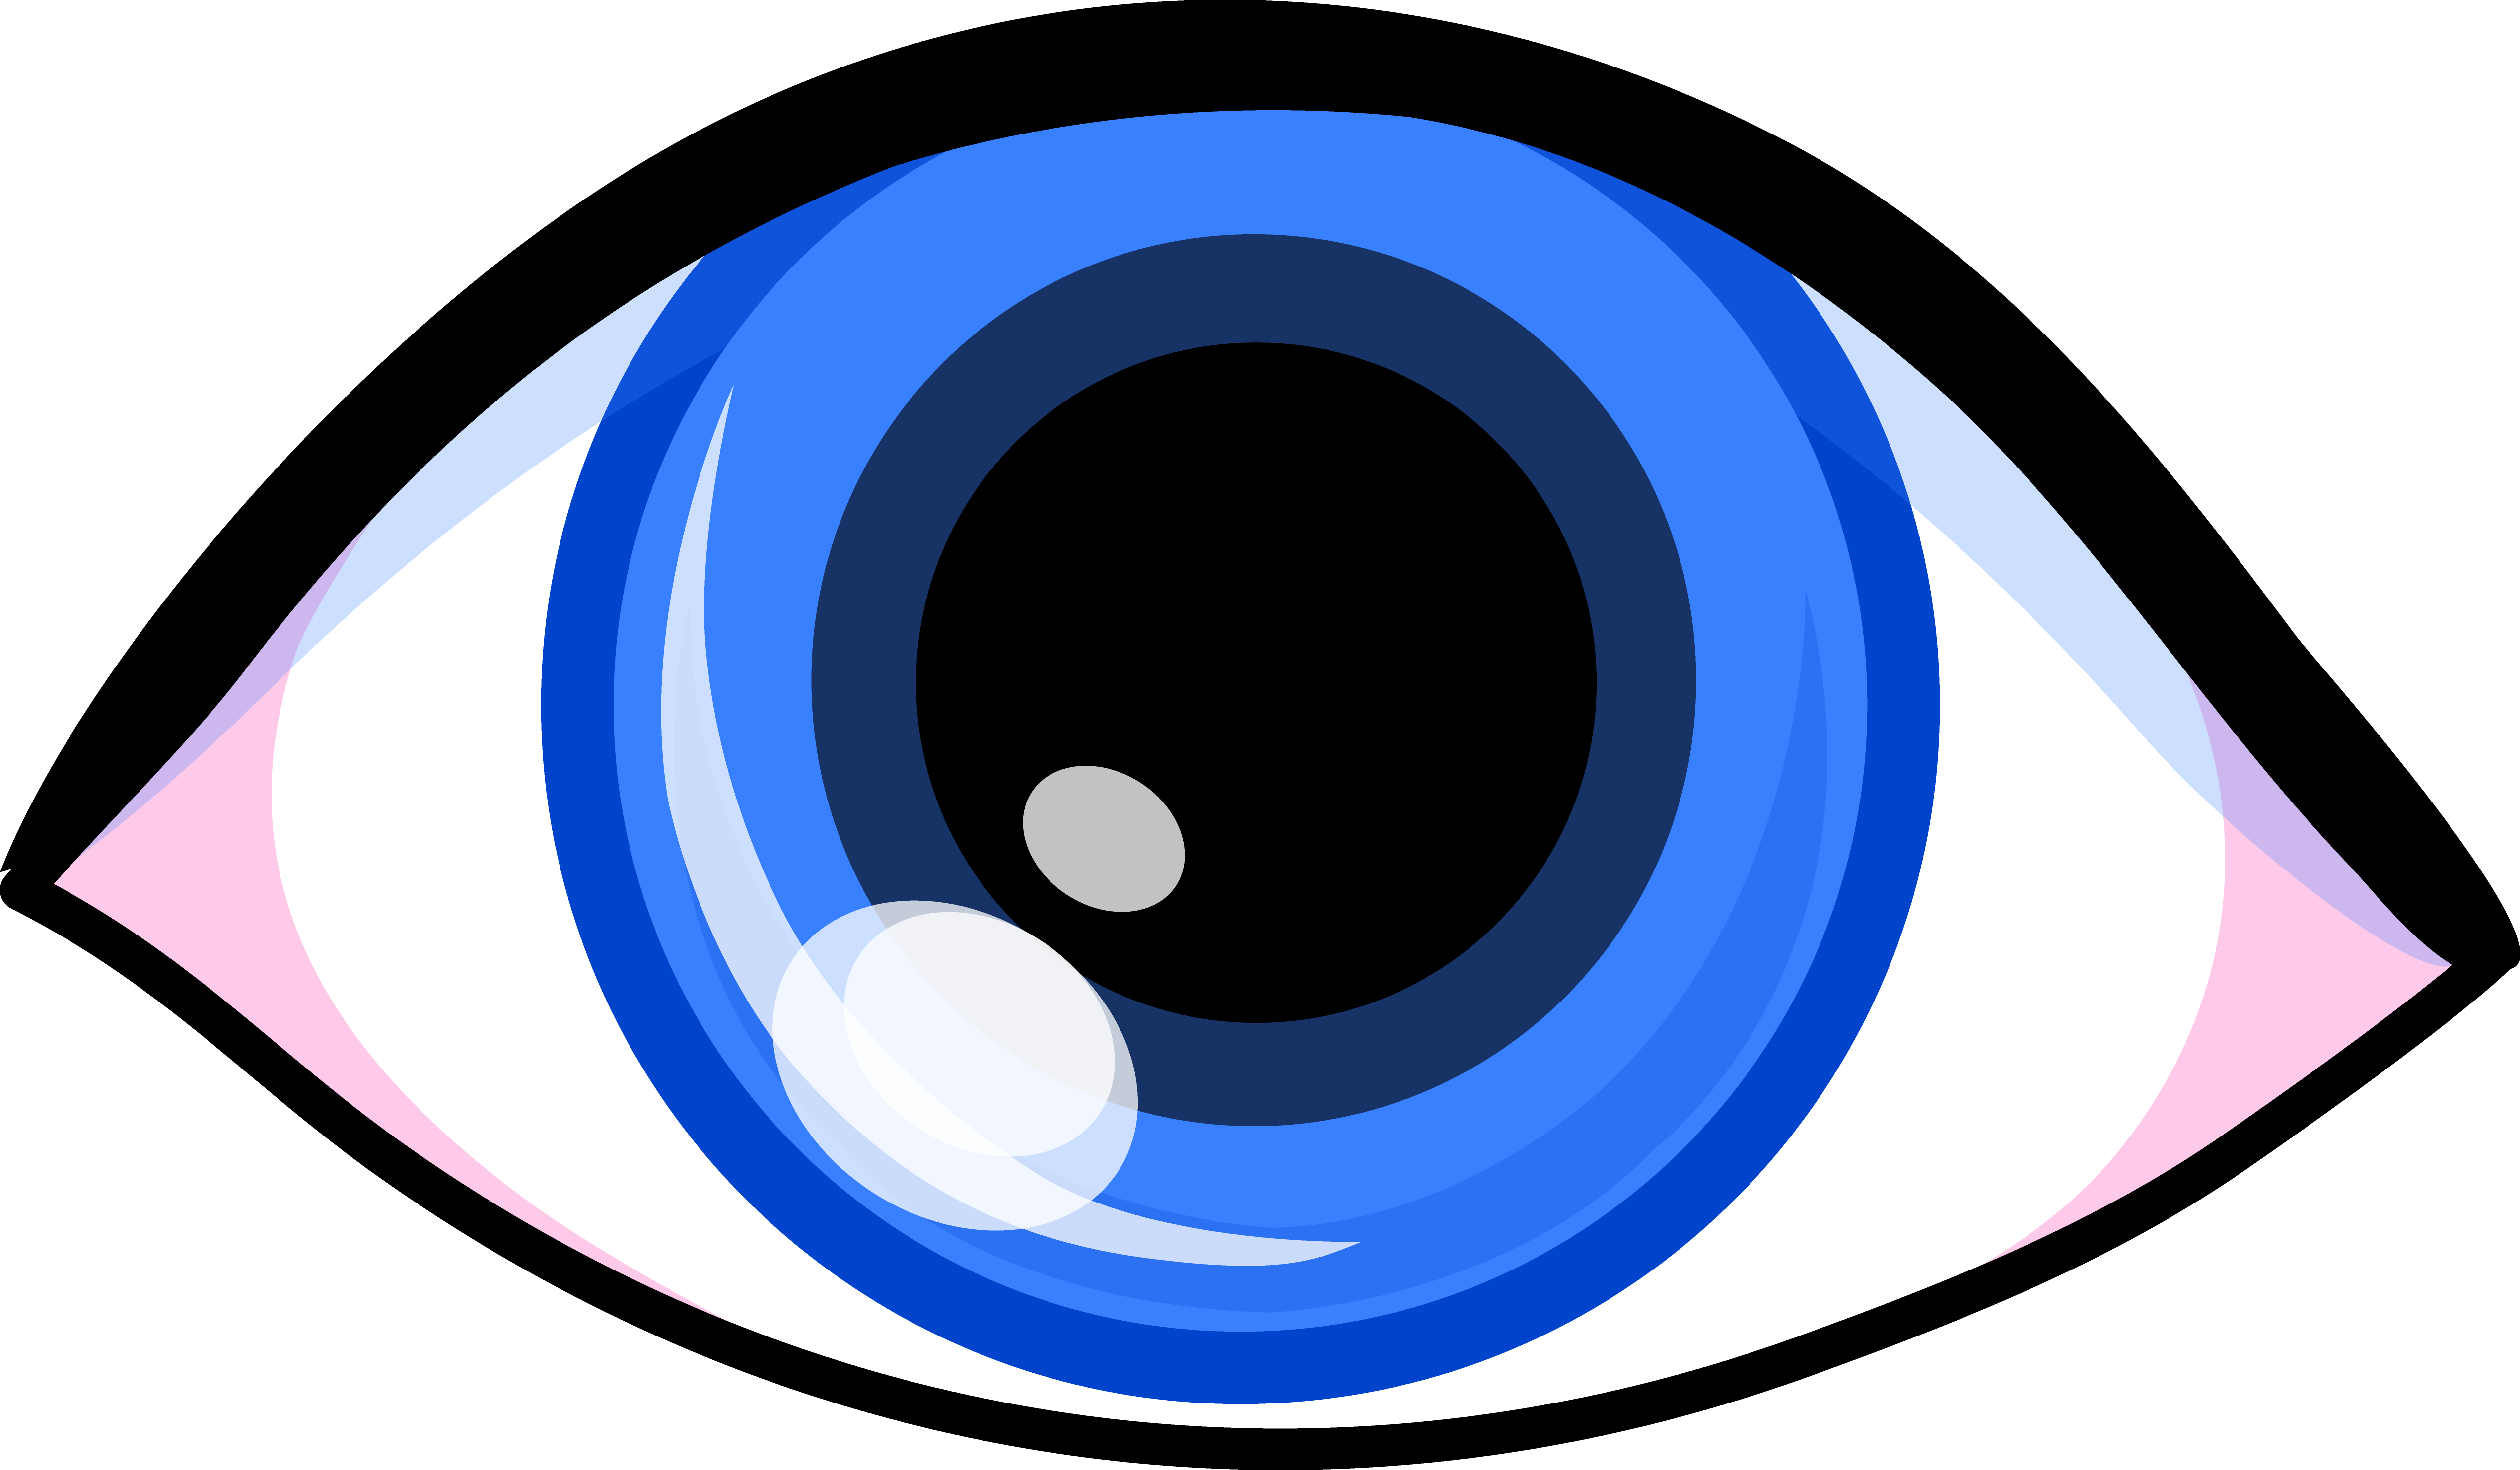 Free Eye Art Pictures, Download Free Clip Art, Free Clip Art.